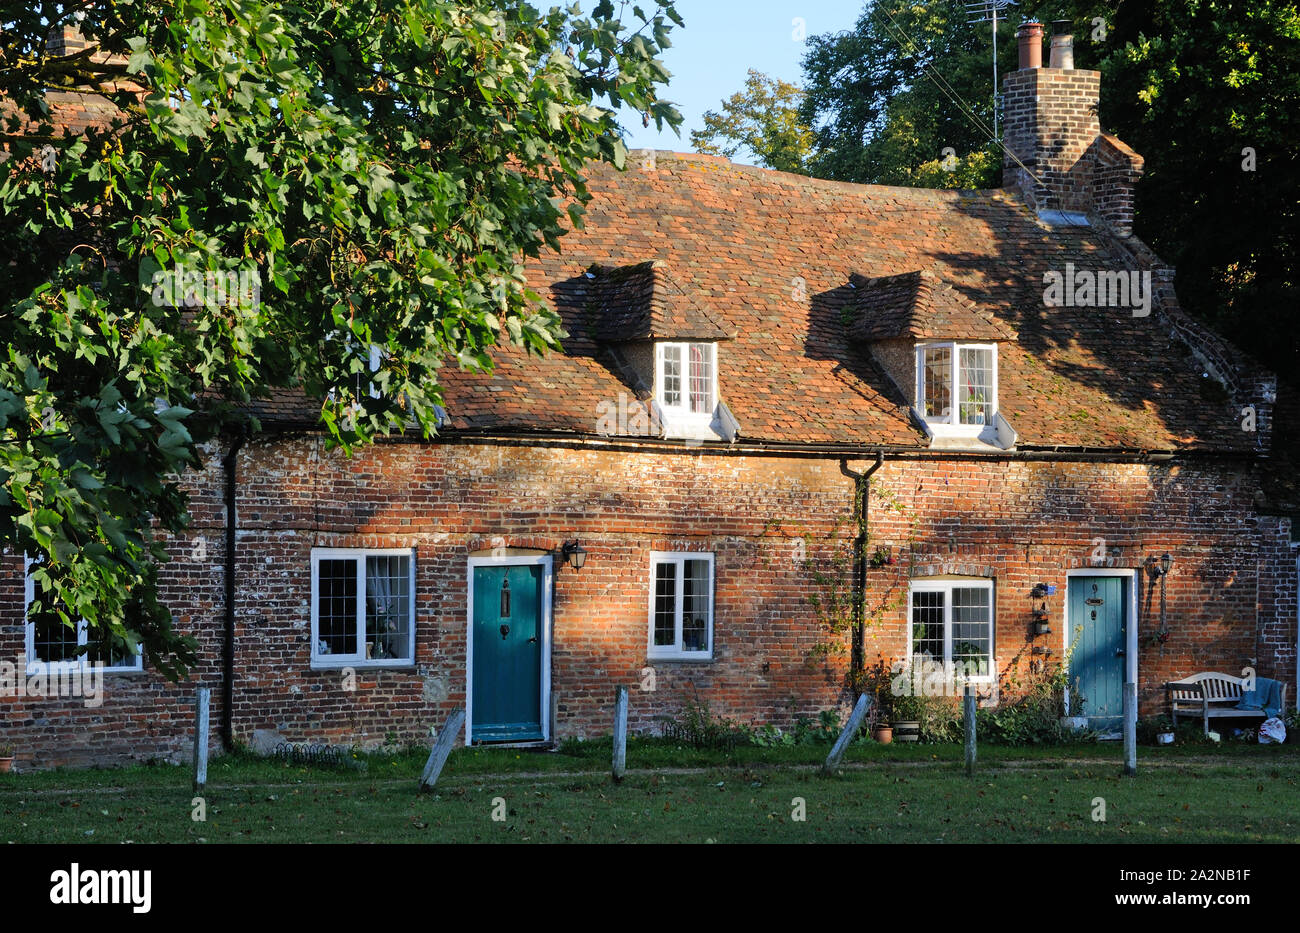 Part of a row of Grade II listed cottages (c.1700) in Littlebourne, Kent, England Stock Photo